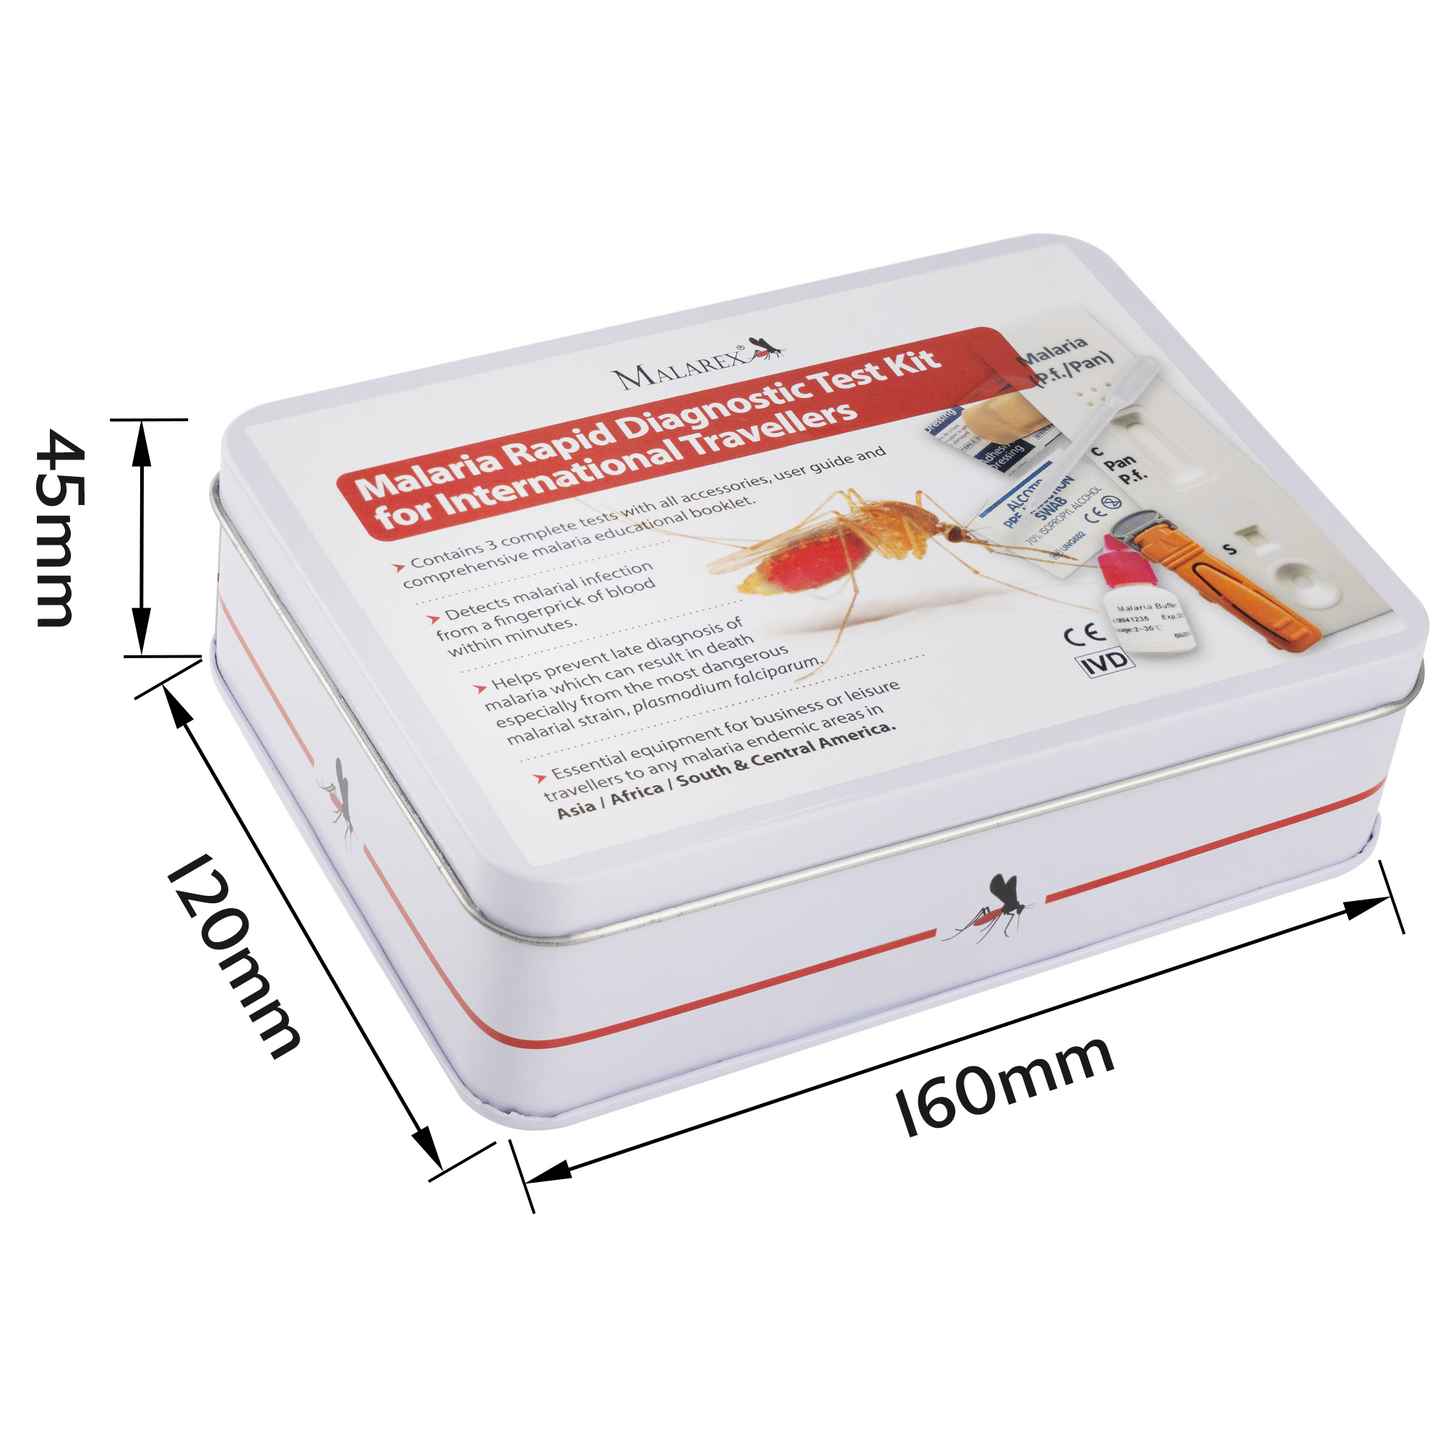 Malarex MX3A Kit: 3 complete malaria tests with all accessories (inc UK vat & delivery) - EXPIRY 31/01/2026